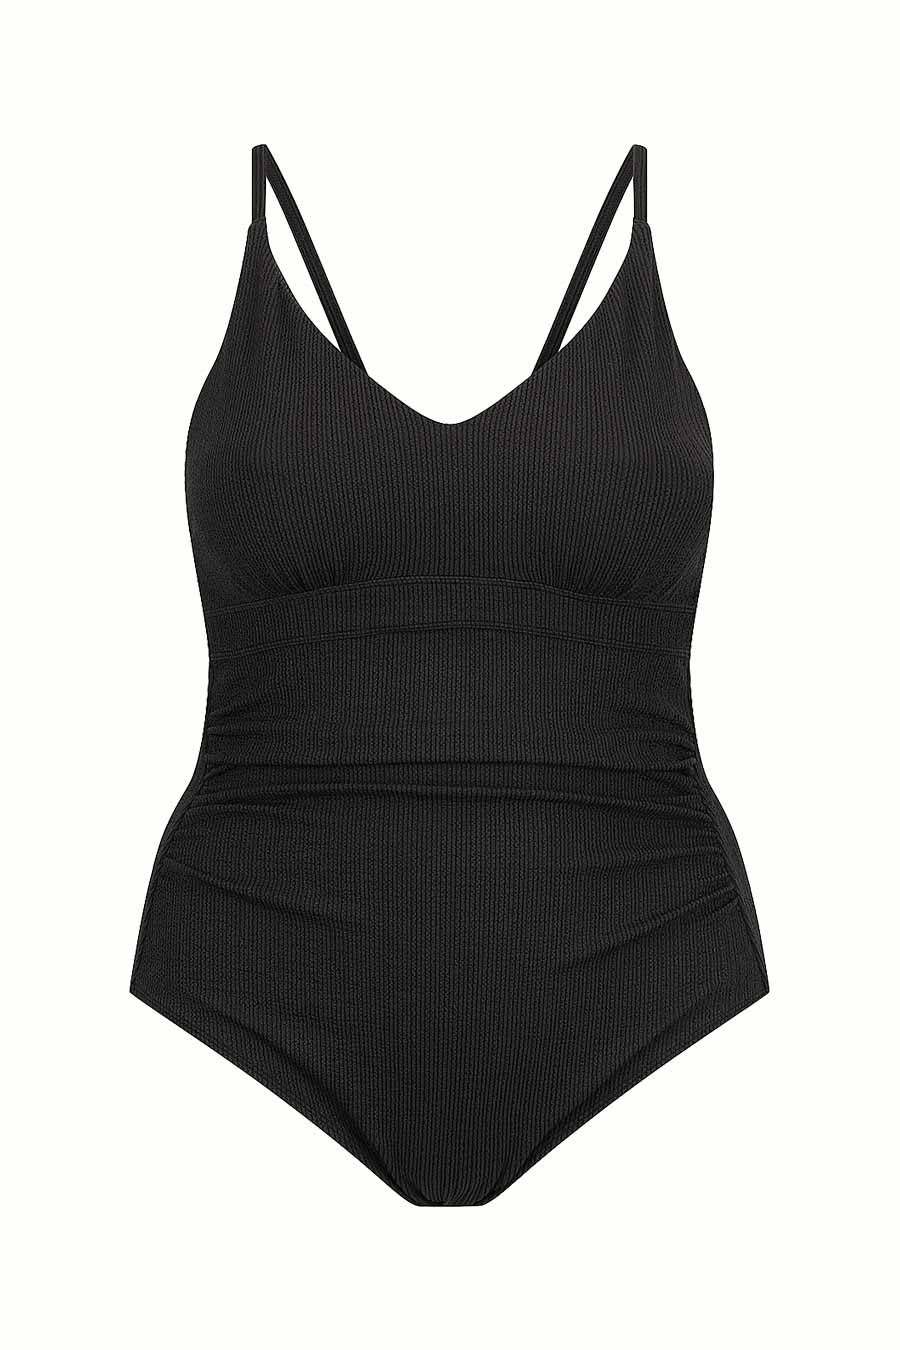 [Pre-Order] Core Support One Piece Swim  - Black Texture from Active Truth™
